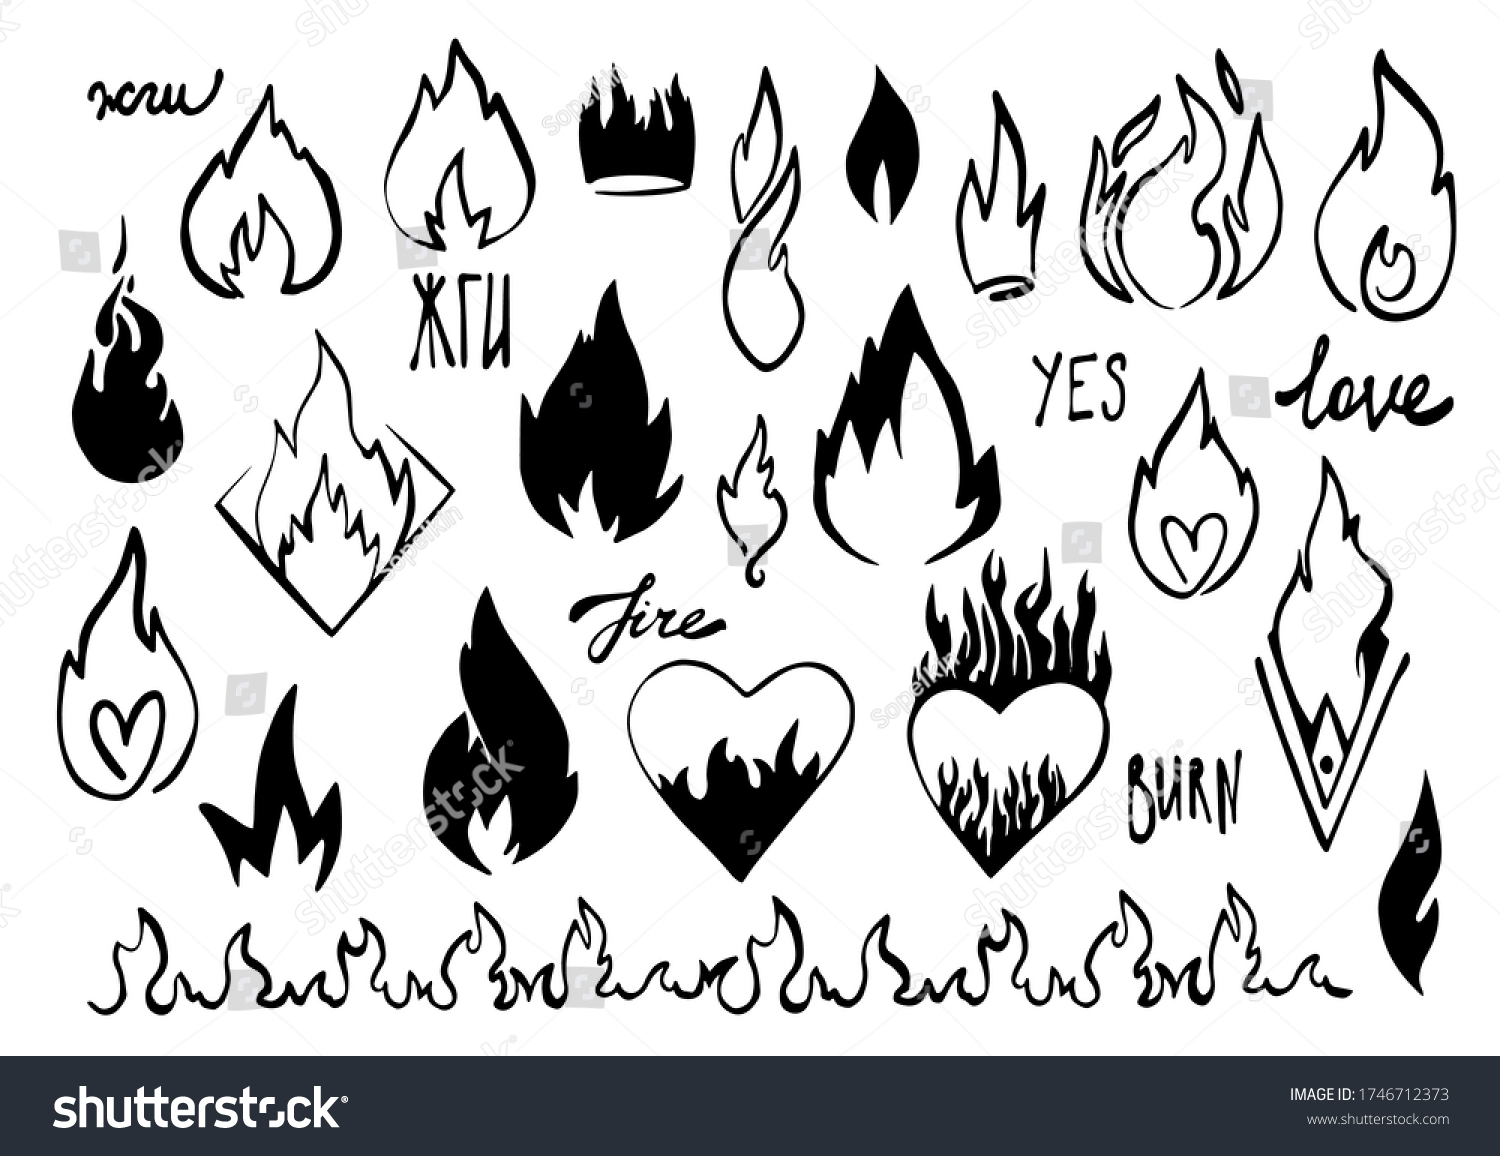 SVG of Cartoon fire flame. Graphic element vector. Sketch crown, fire heart, in love. Hand drawing hot black tattoo illustration on white vintage background. Line silhouette bonfire draw. Retro brush outline svg